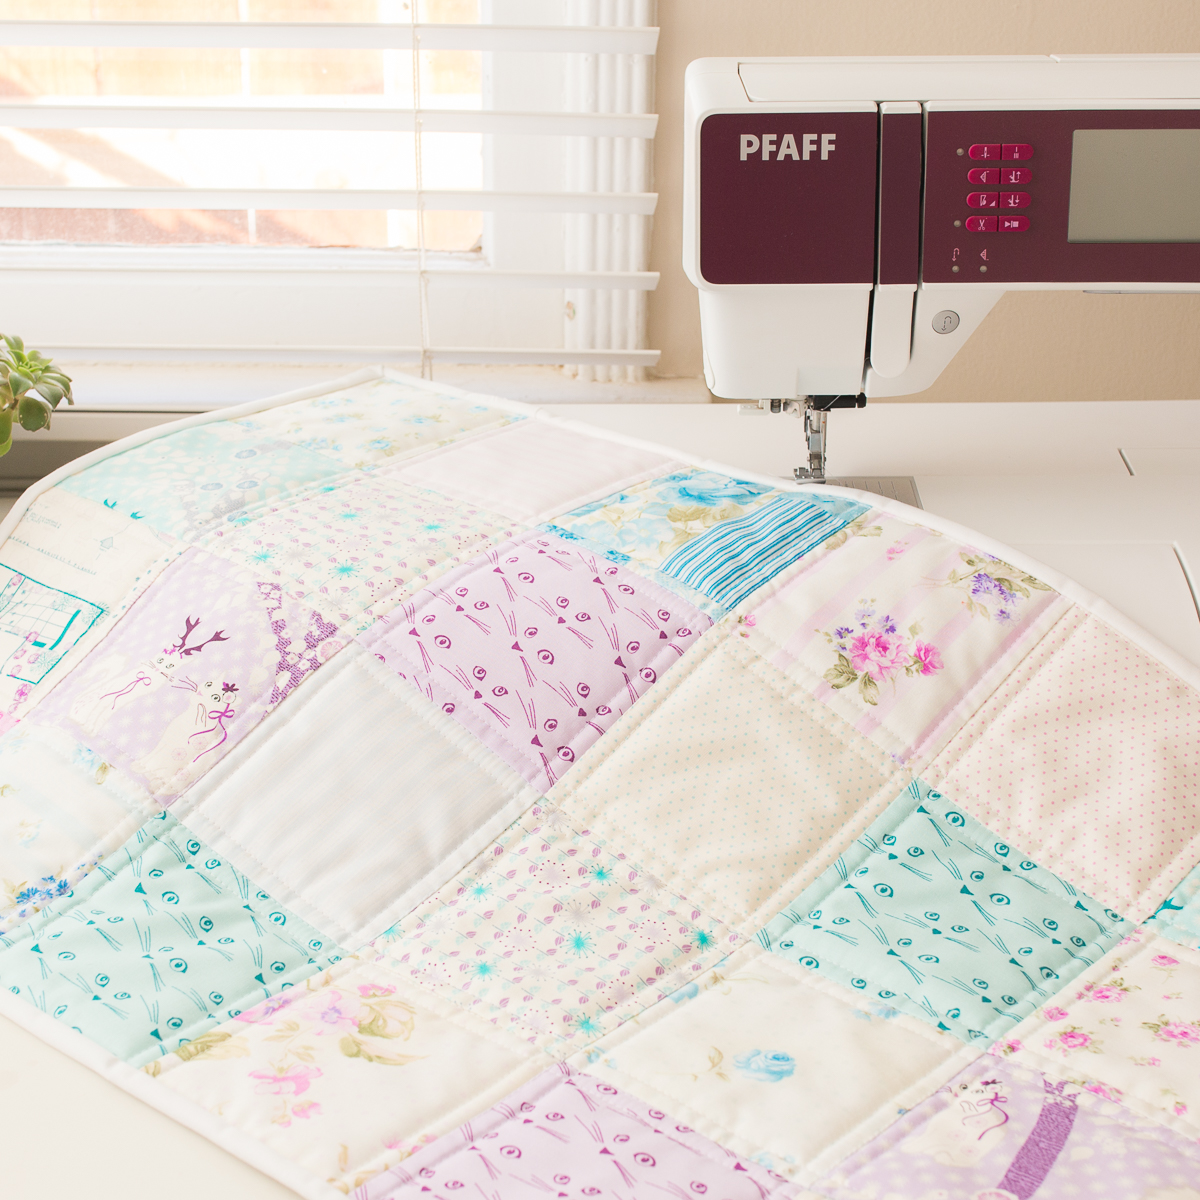 New Patchwork Sewing Mat for the Sewing Machine » Loganberry Handmade